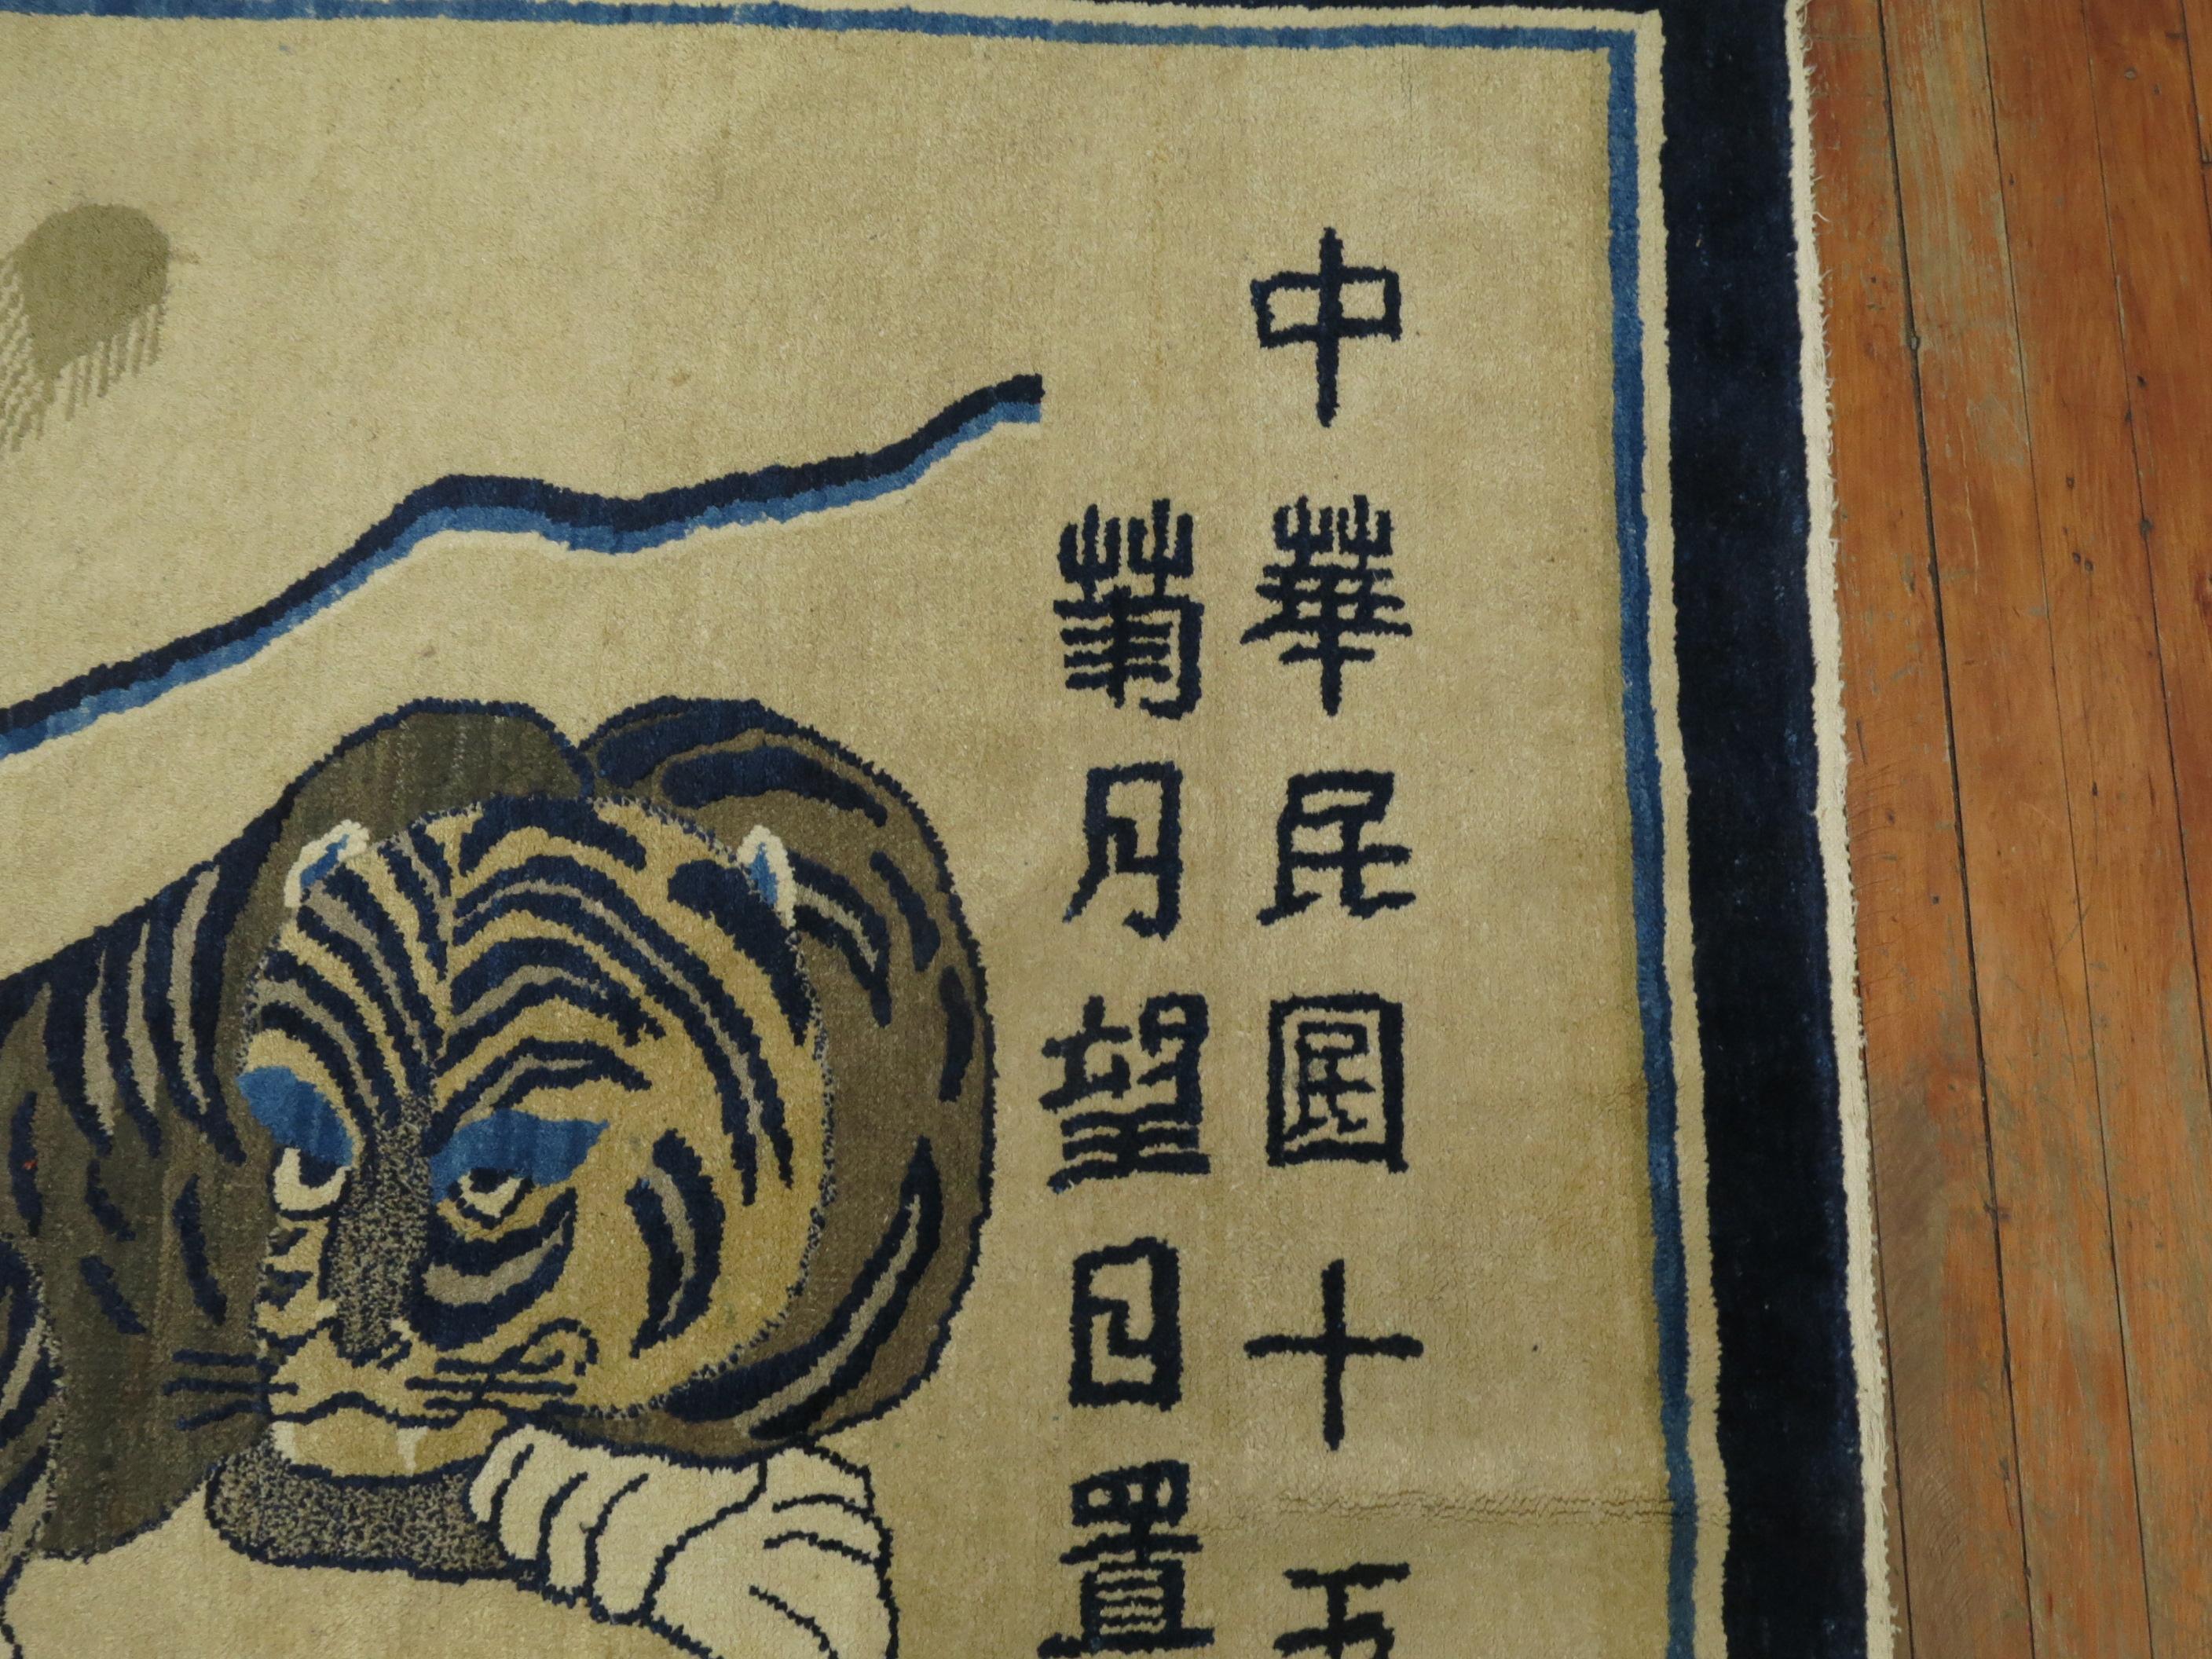 An early 20th century fine quality mysterious Chinese tiger pictorial rug with symbolic Chinese elements, dated 1926. We are unable to translate the symbols.

Decorative oriental, Chinese rugs and carpets have been a significant art form within